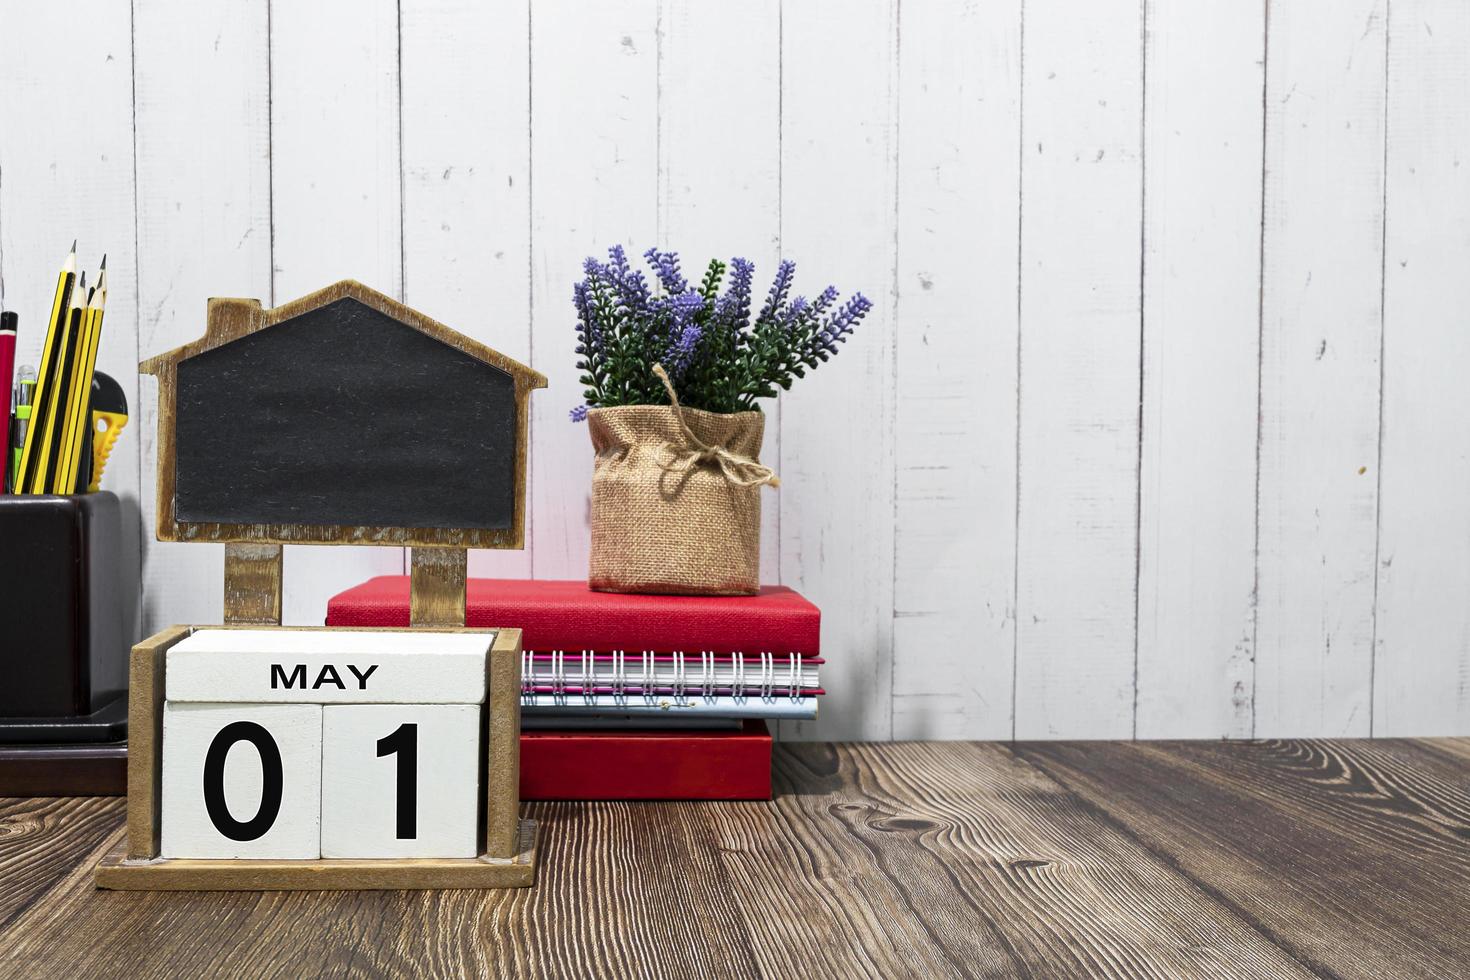 May 01 calendar date text on white wooden block a table. photo